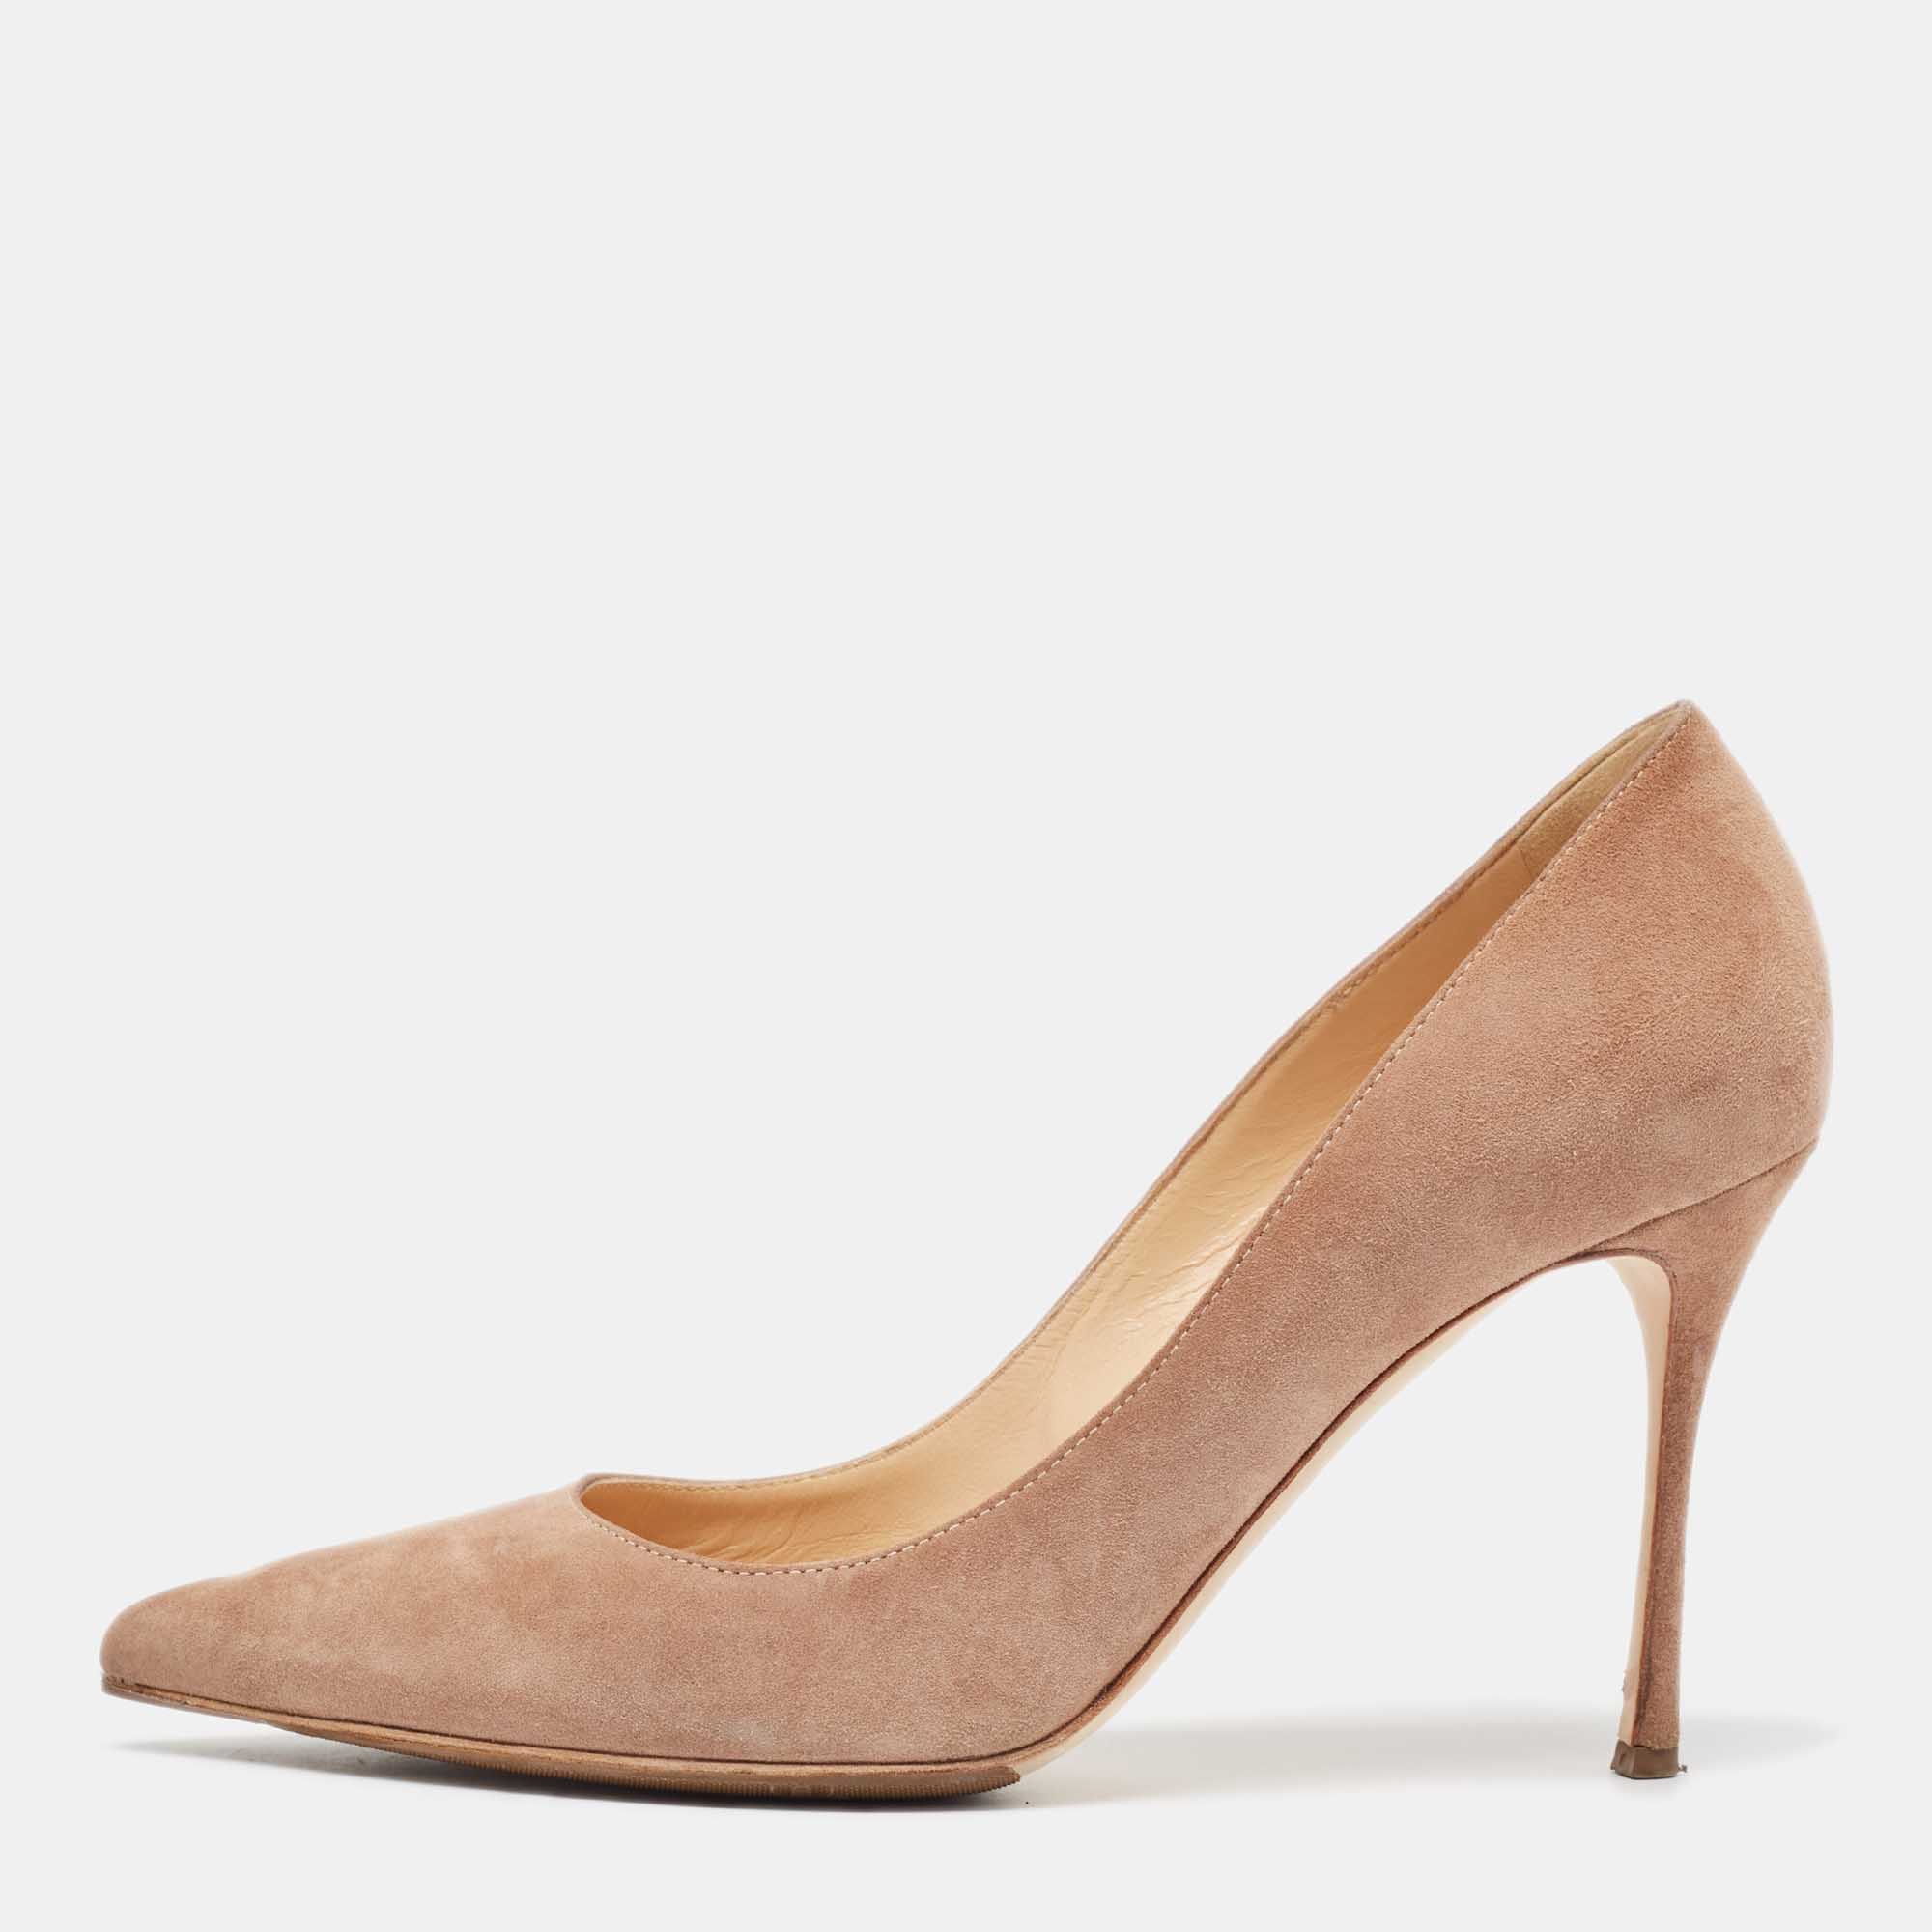 Sergio rossi beige suede pointed toe pumps size 39